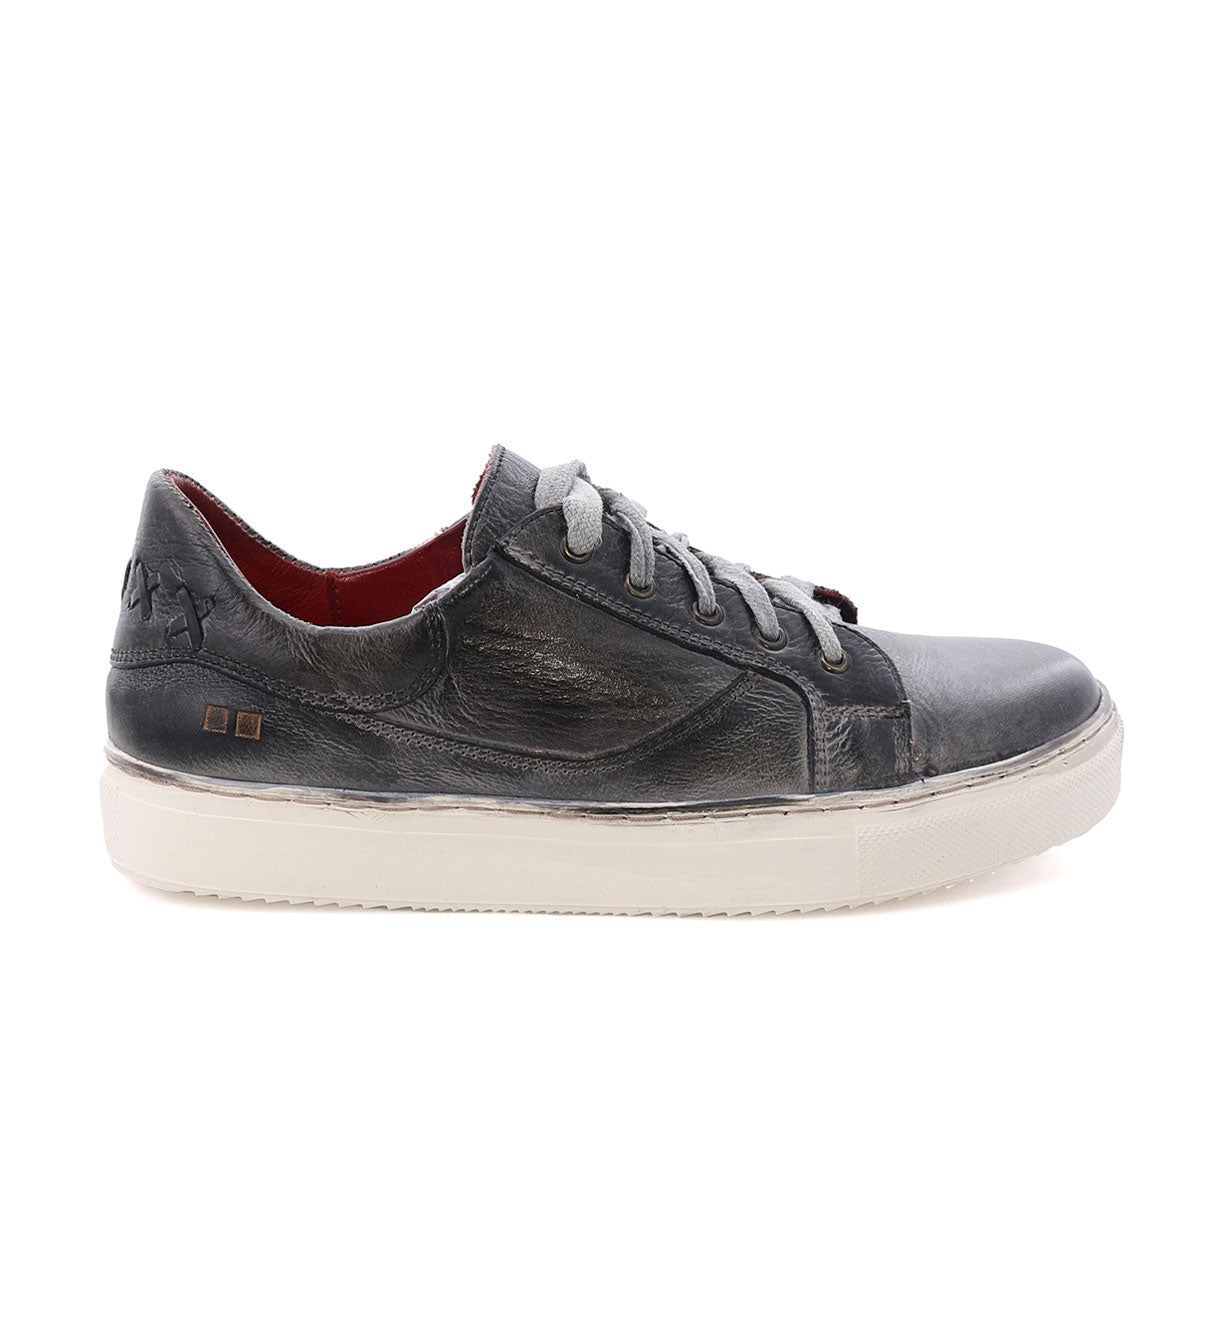 A men's Azeli grey leather sneaker with a white sole by Bed Stu.